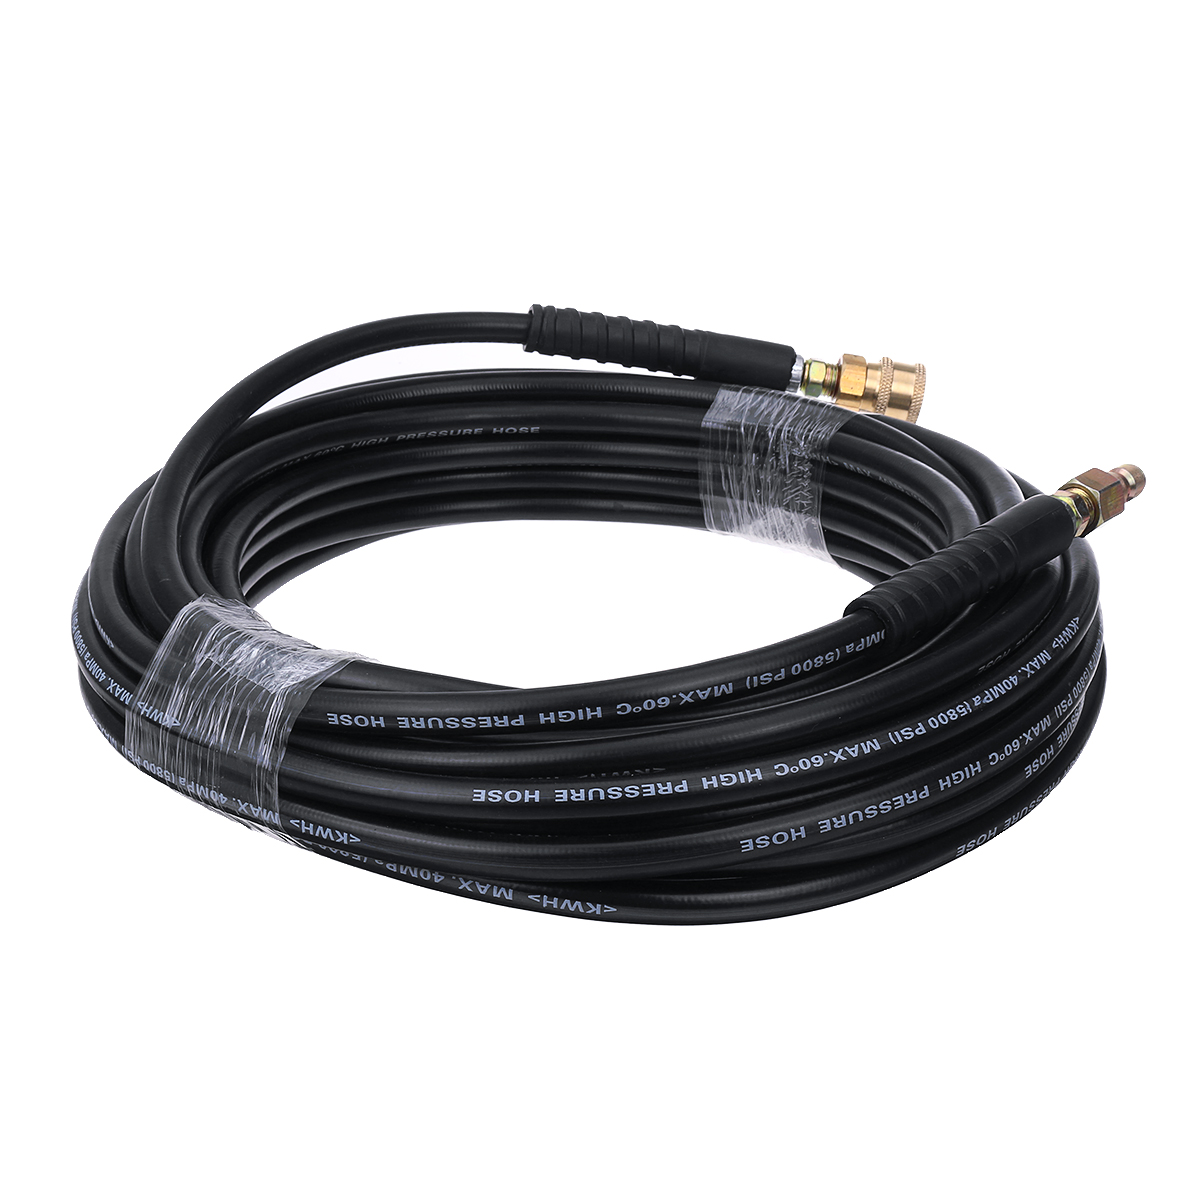 10M-High-Pressure-Washer-Hose-14-Inch-Quick-Release-Couplings-Tube-1582199-3